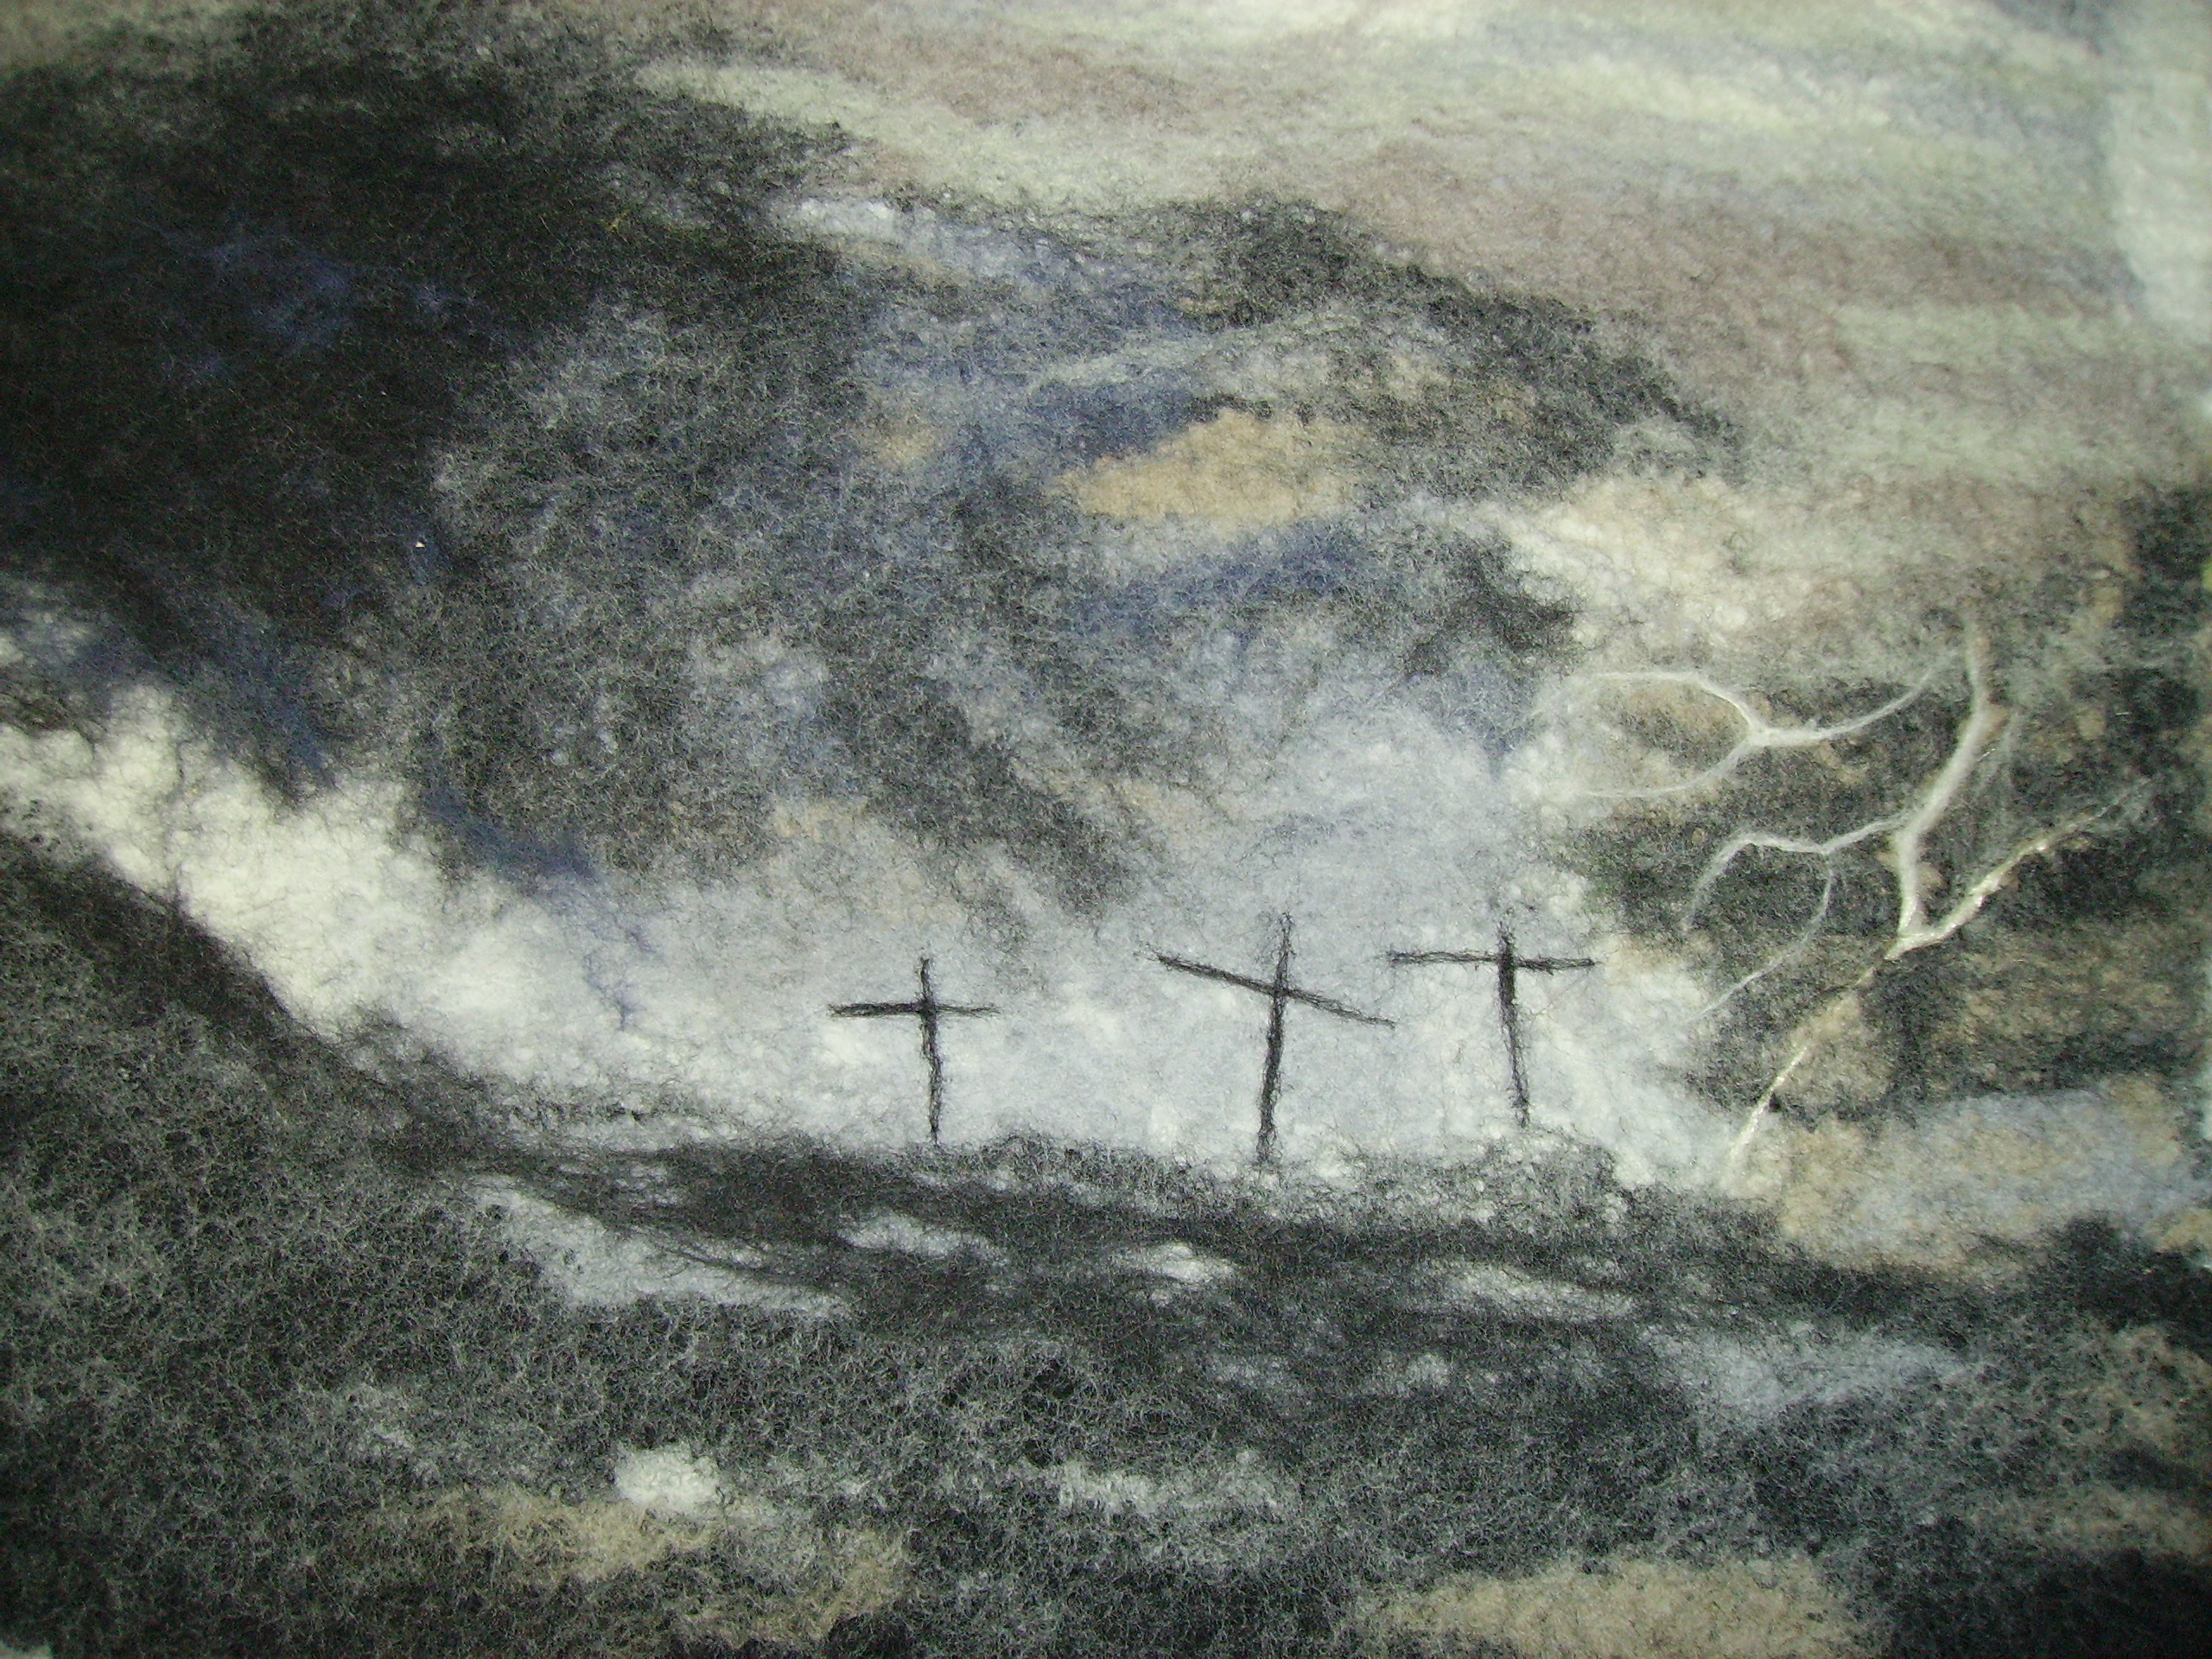 Twelth Station - hand felted merino wool, part of a set of 'Stations of the Cross'